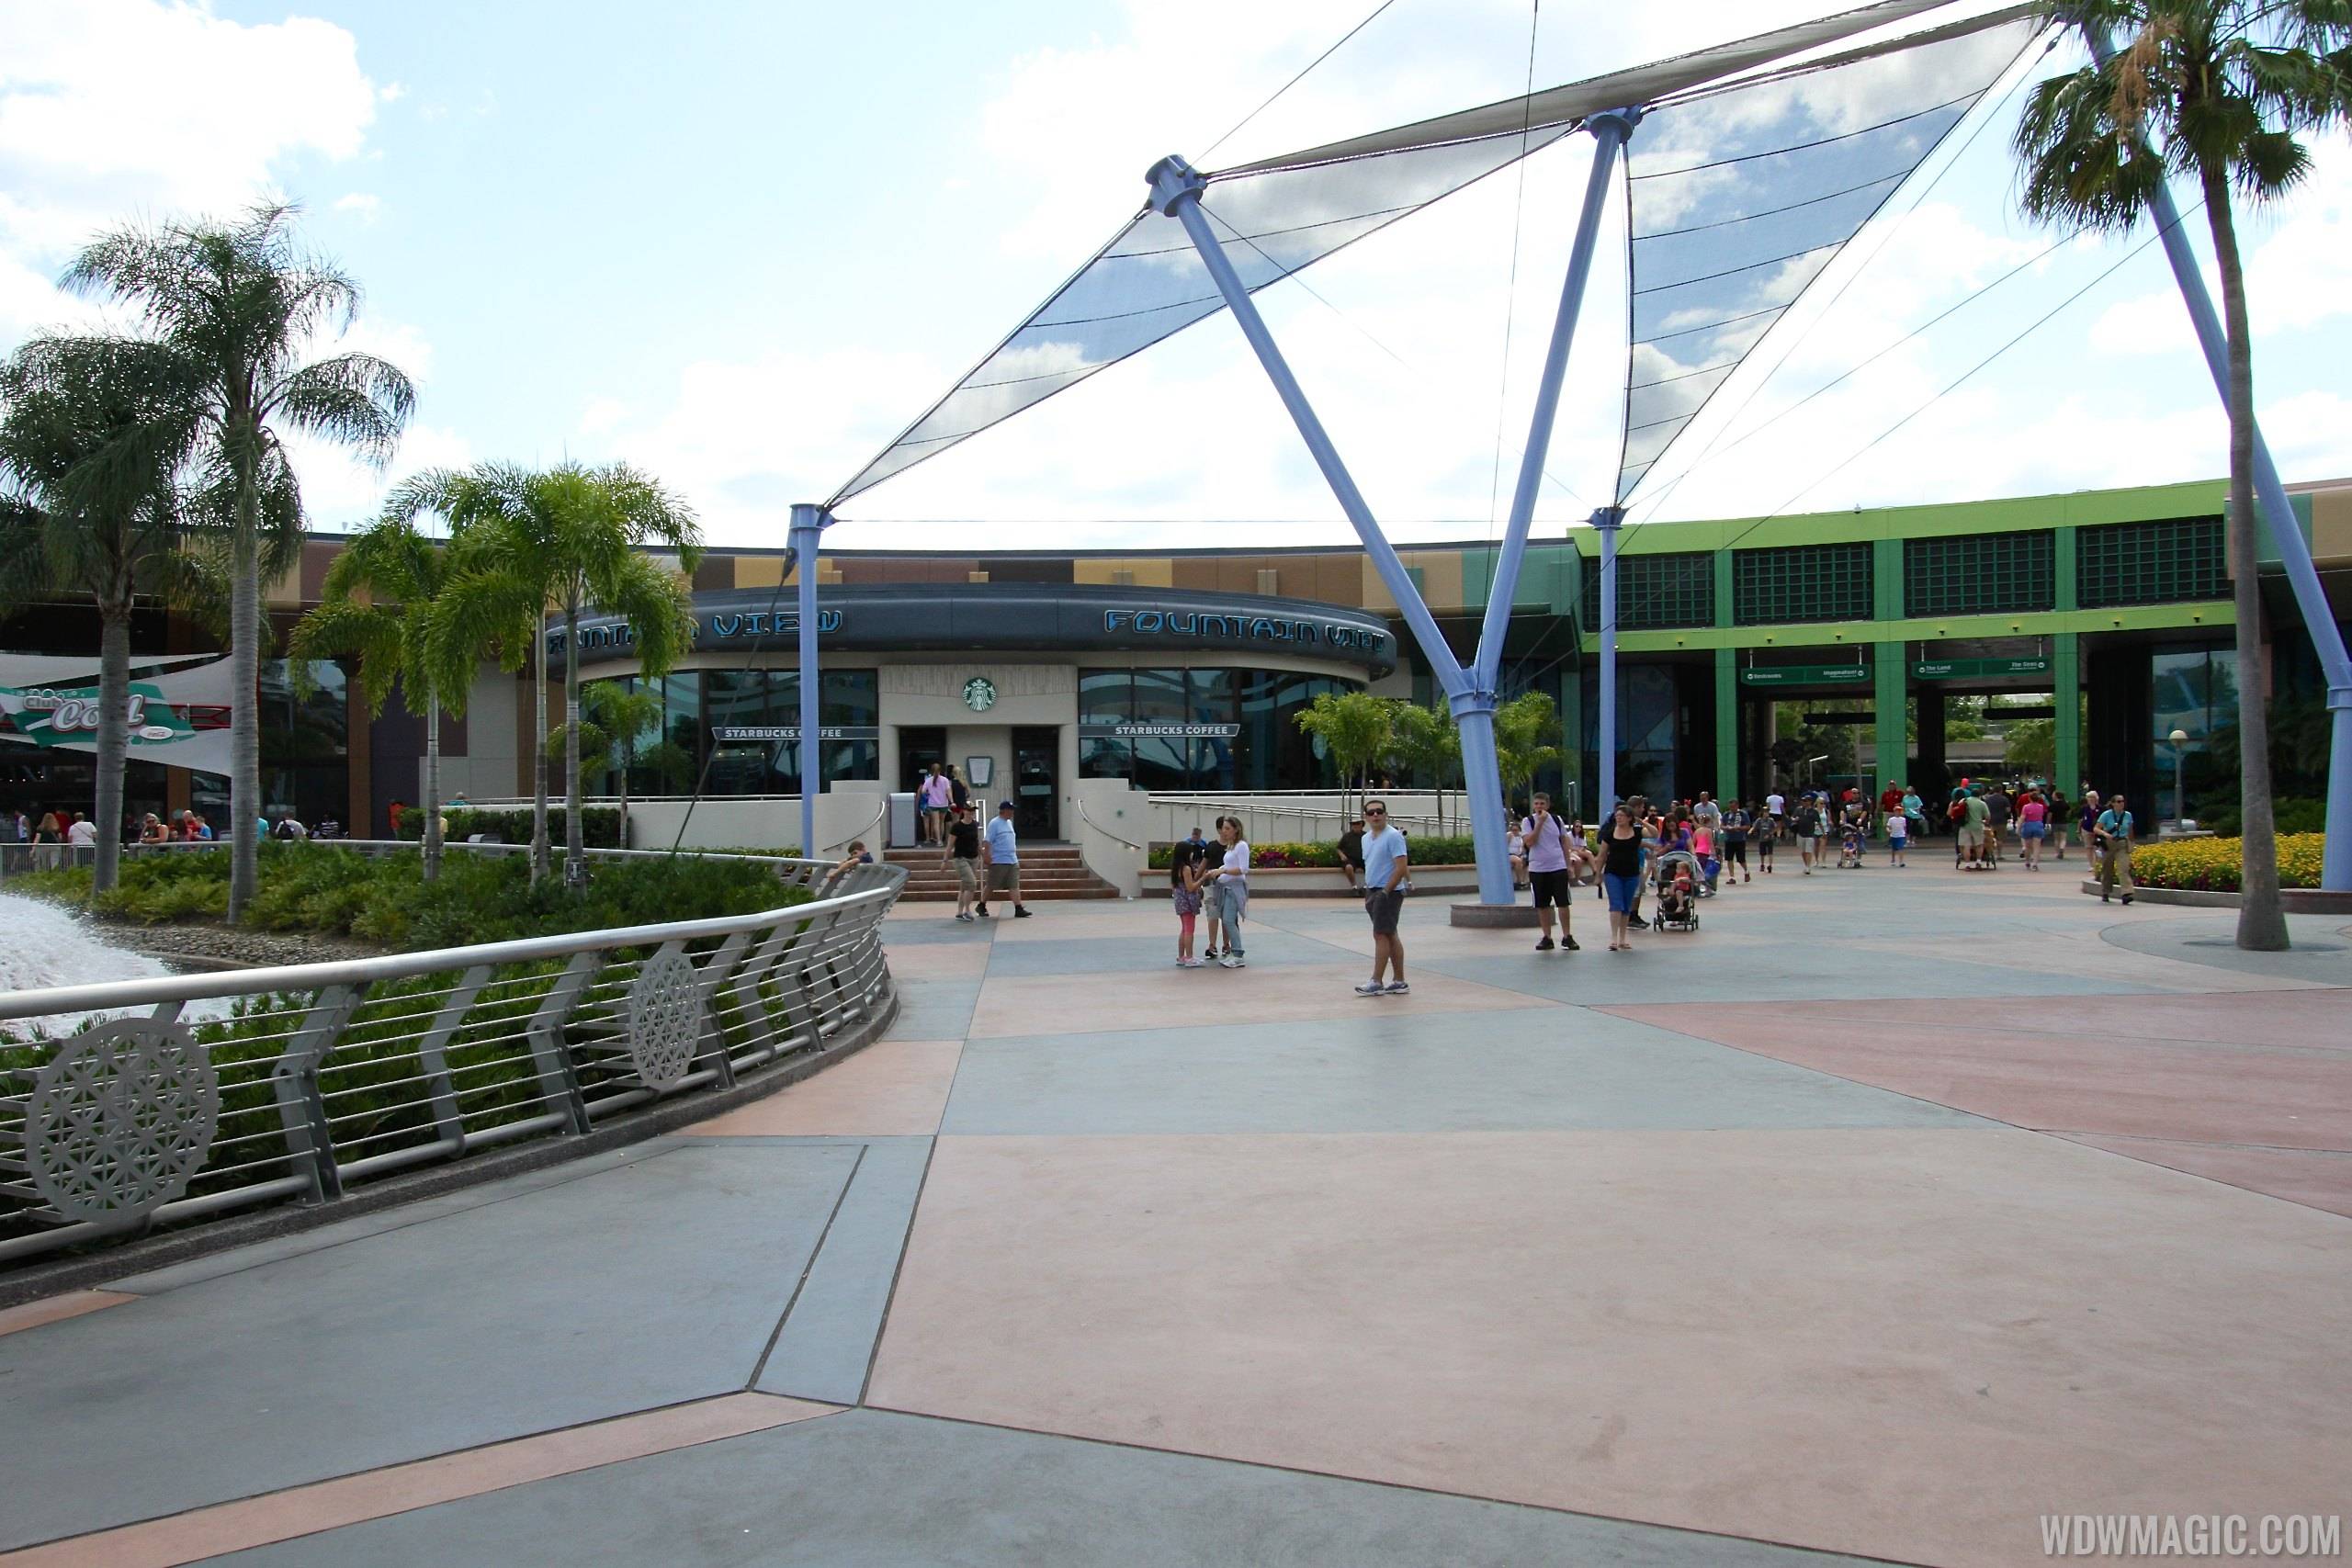 PHOTOS - Updated look at the new Future World paint scheme at Epcot